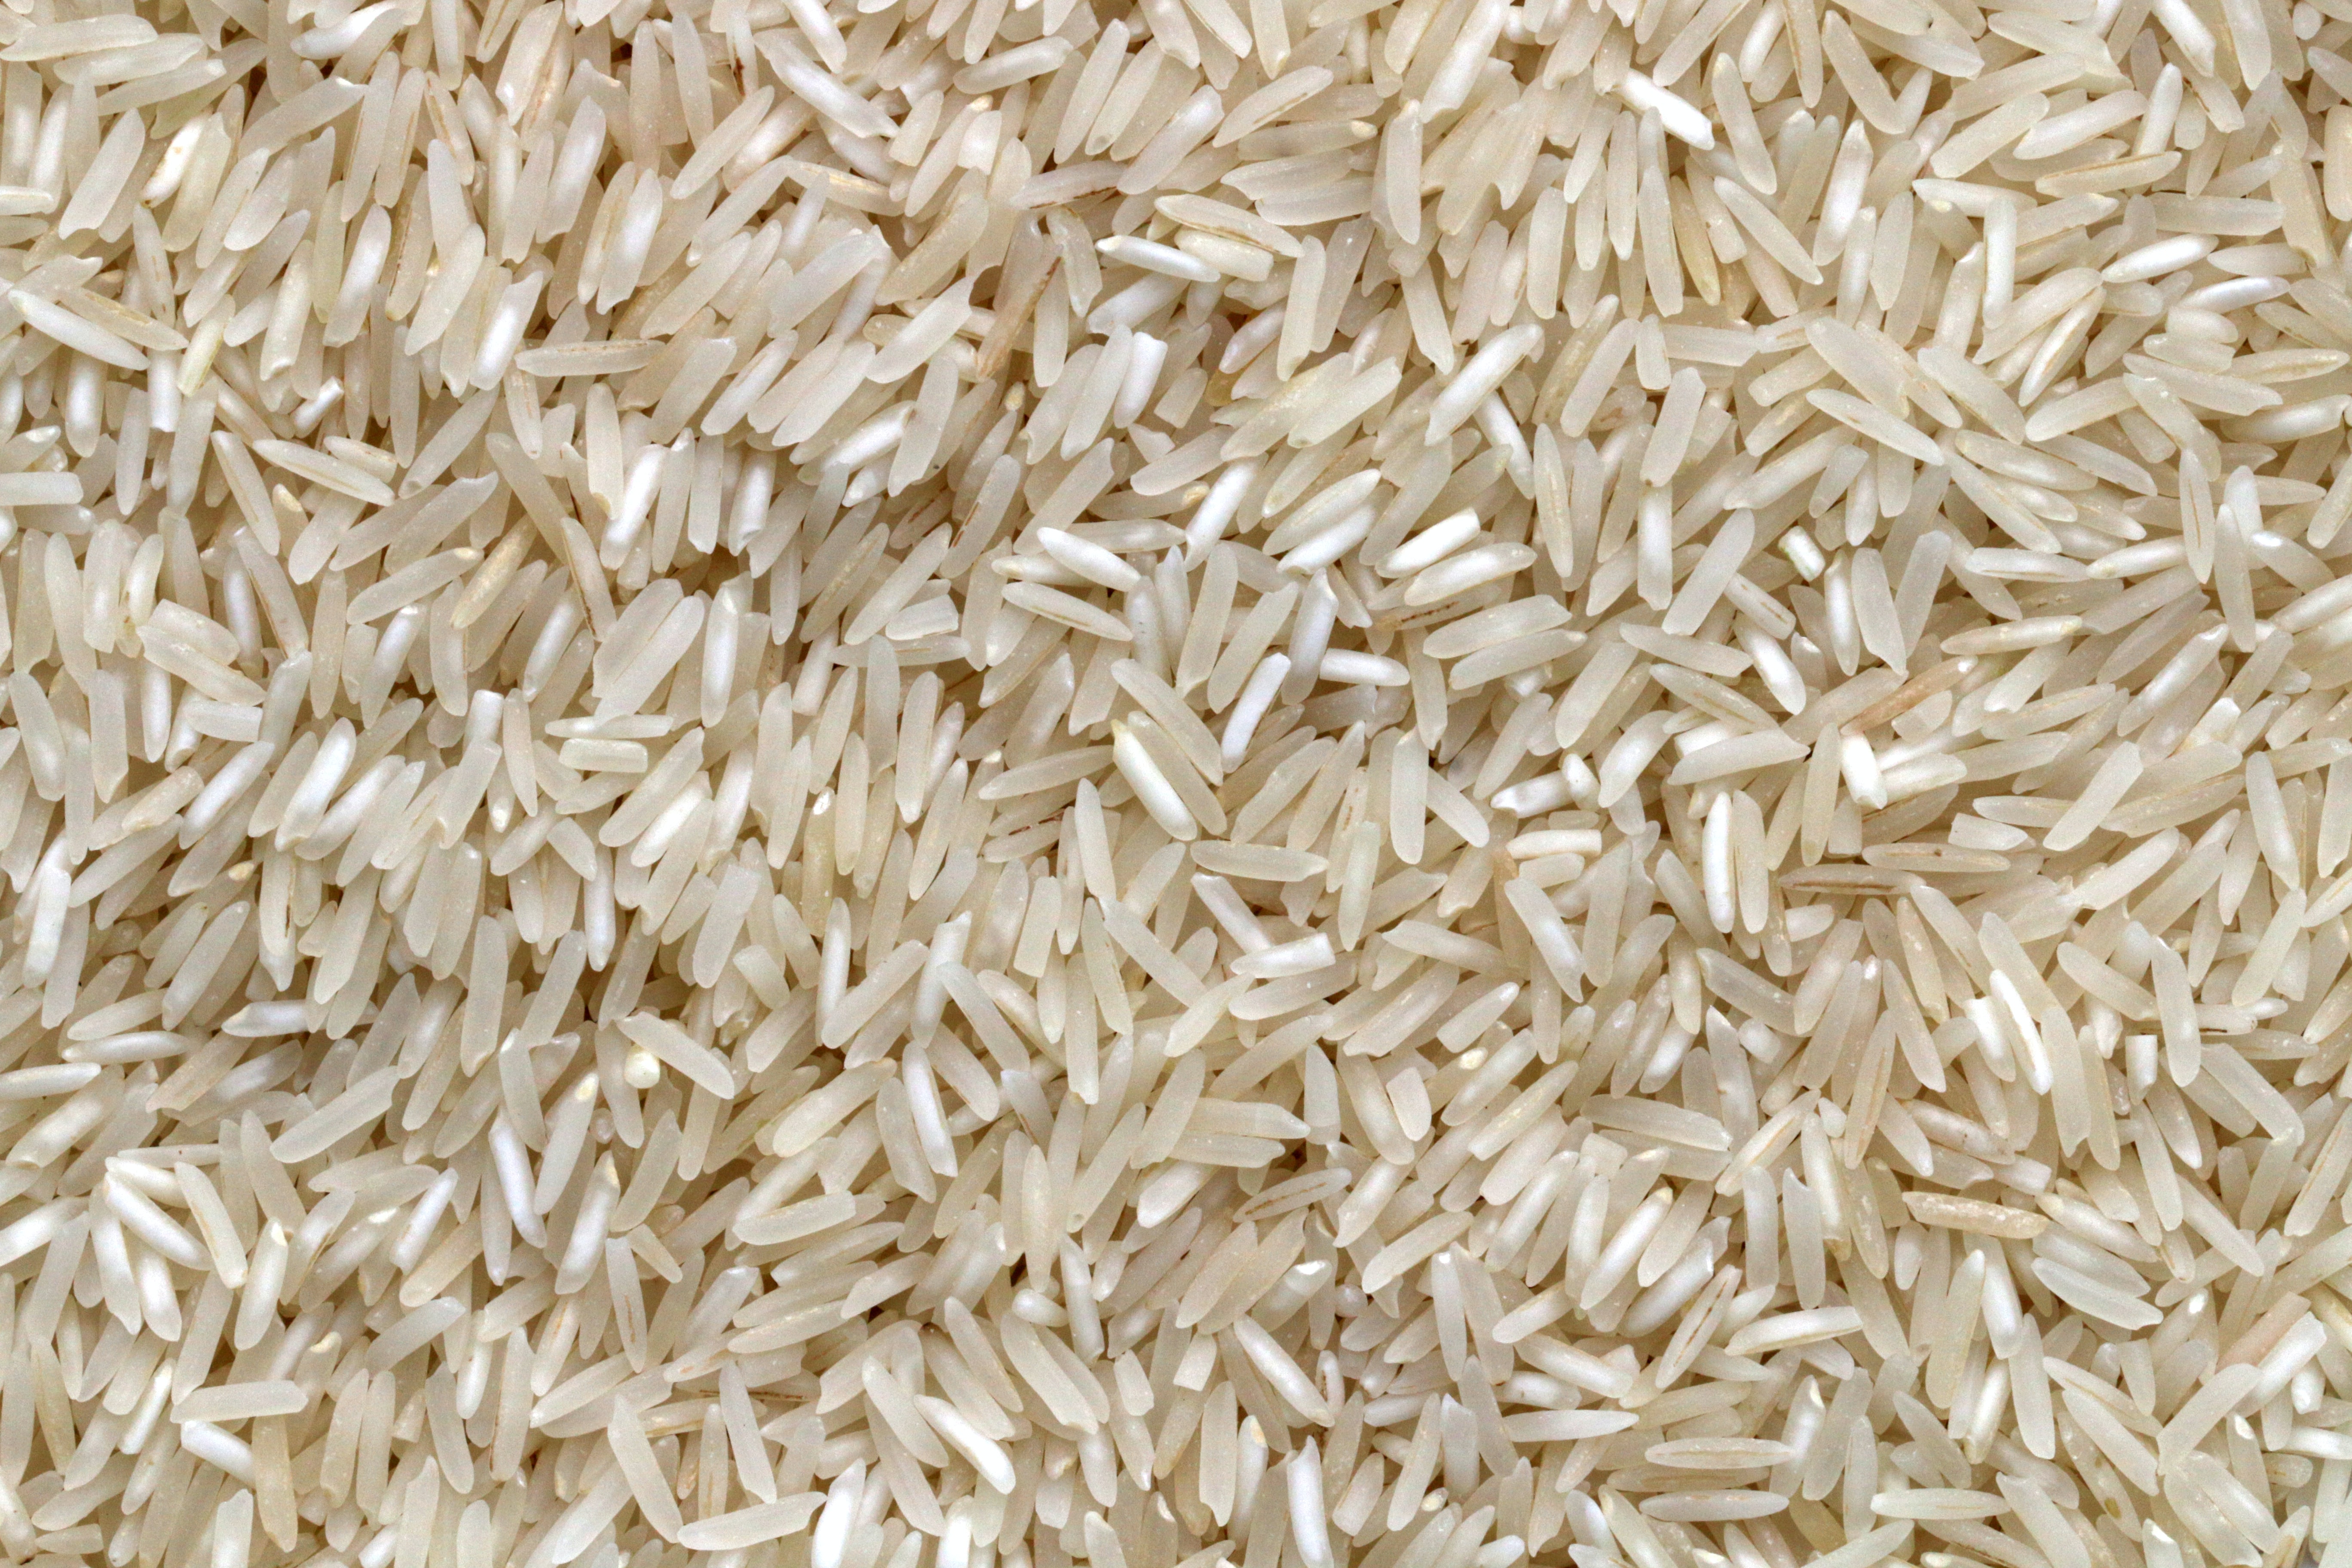 Vietnam ready to increase rice exports